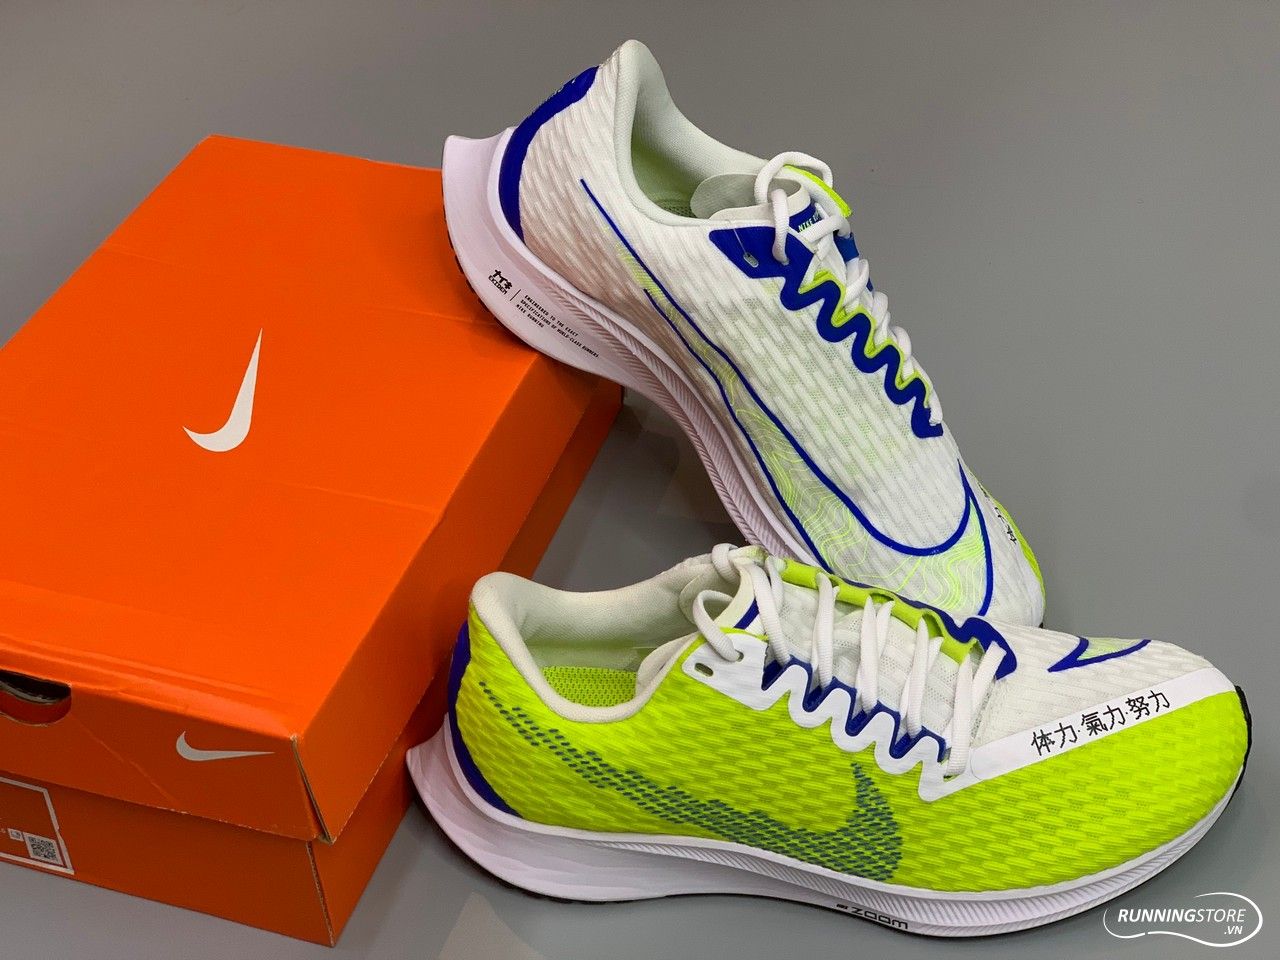 Nike Zoom Rival Fly 2 - Cyber / Racer Blue / White - DC5240-389